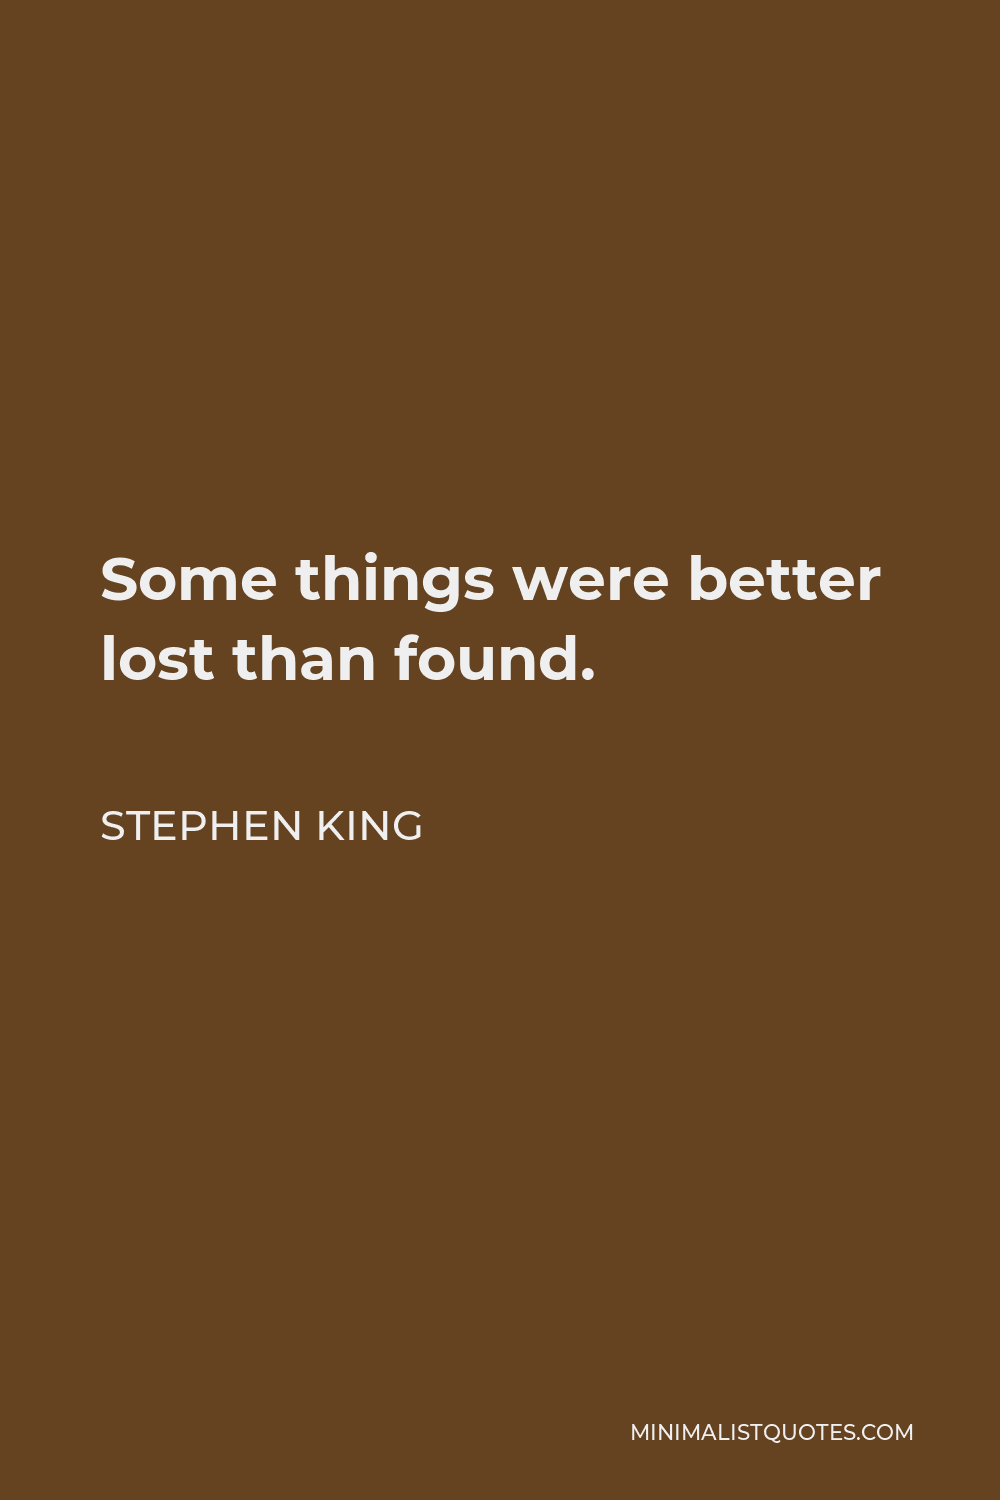 Stephen King Quote - Some things were better lost than found.